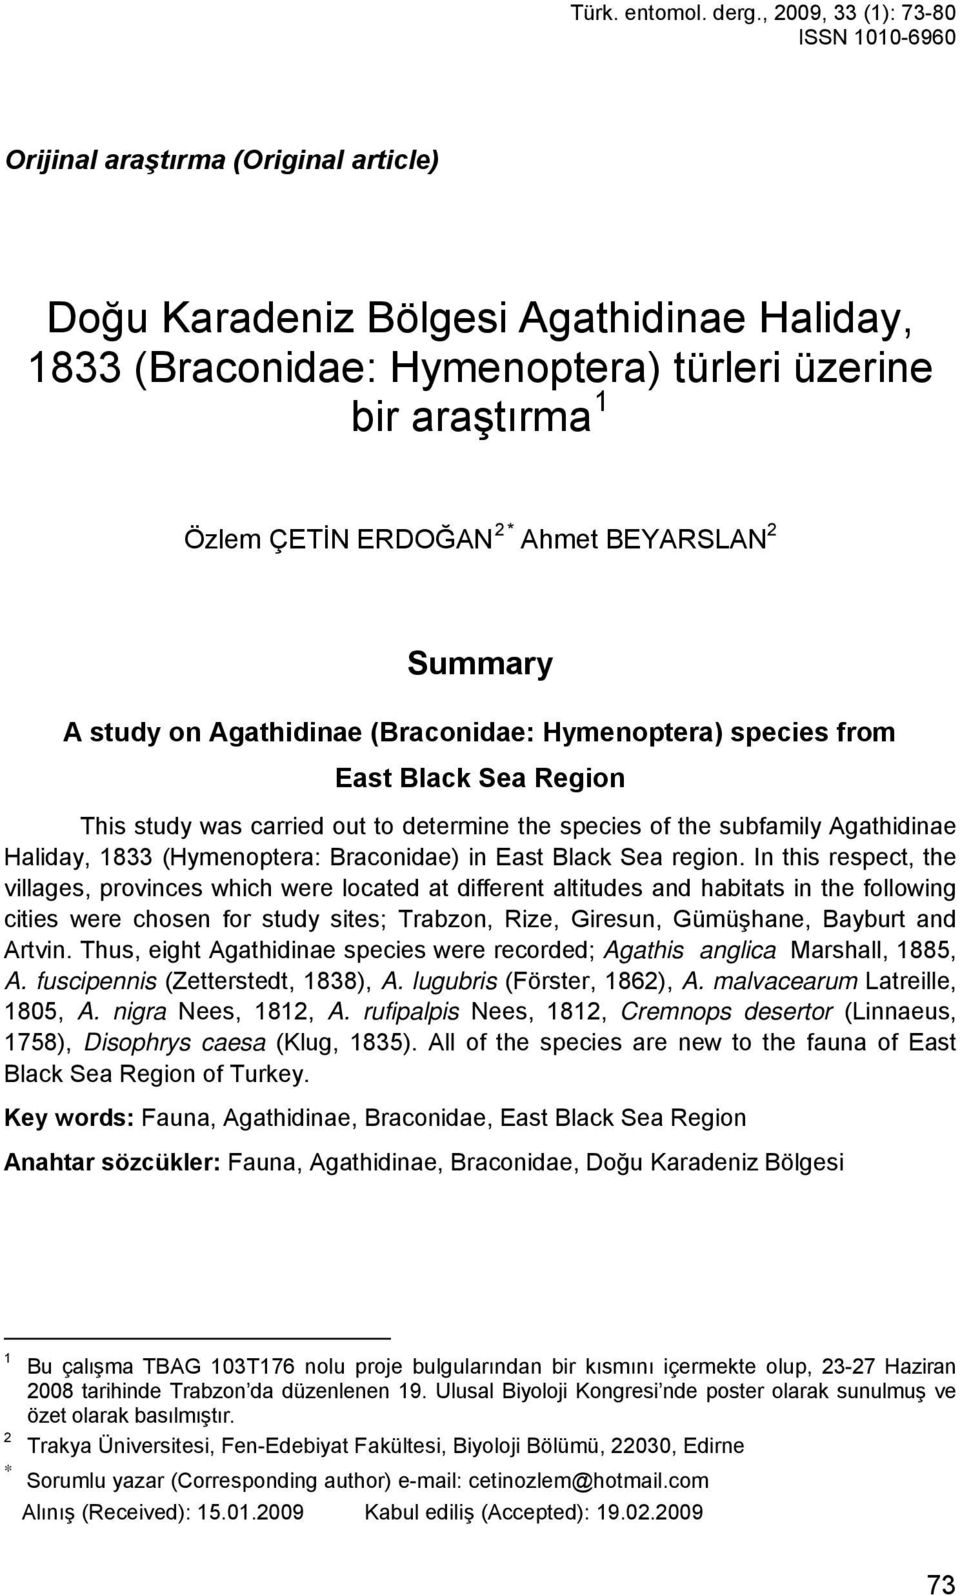 ERDOĞAN 2 * Ahmet BEYARSLAN 2 Summary A study on Agathidinae (Braconidae: Hymenoptera) species from East Black Sea Region This study was carried out to determine the species of the subfamily